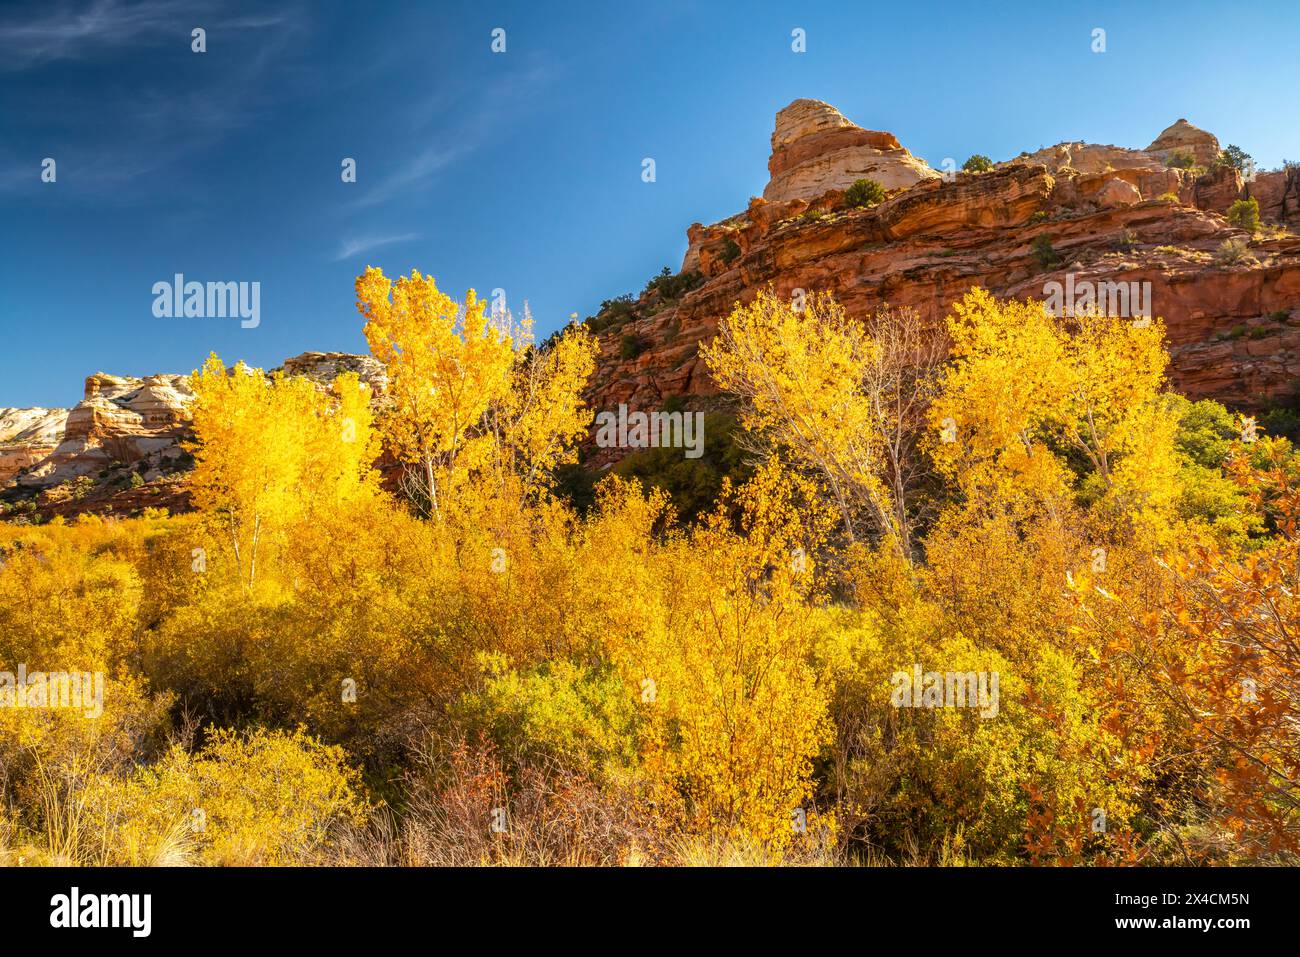 USA, Utah, Grand Staircase Escalante National Monument. Landscape with formations and trees in fall color. Stock Photo